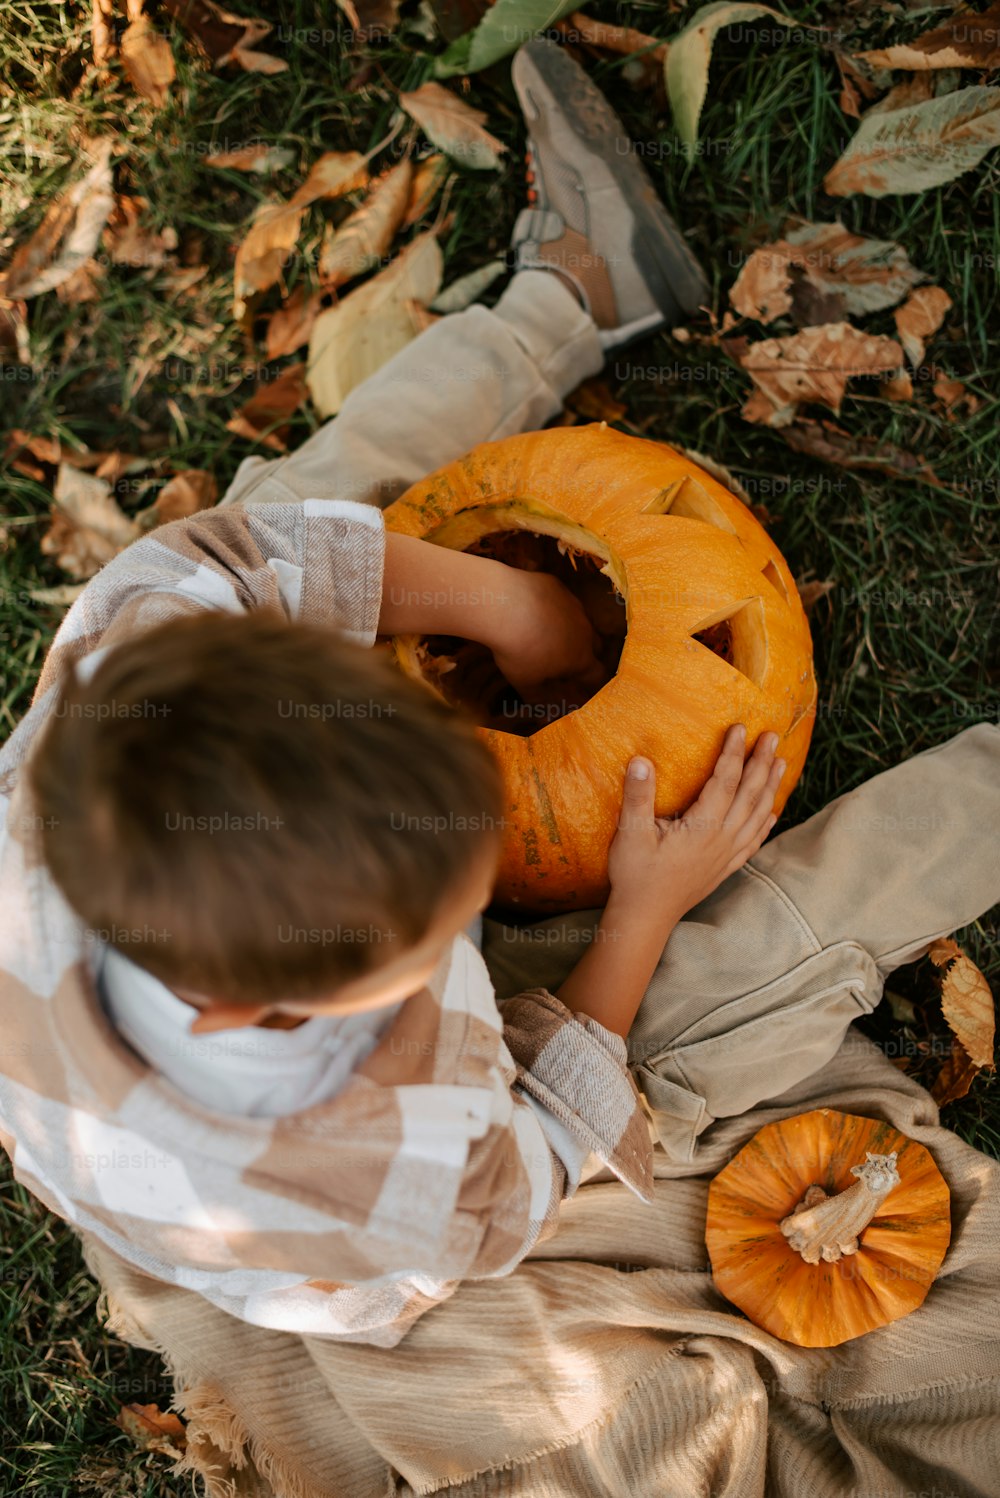 a young boy is carving a pumpkin in the grass